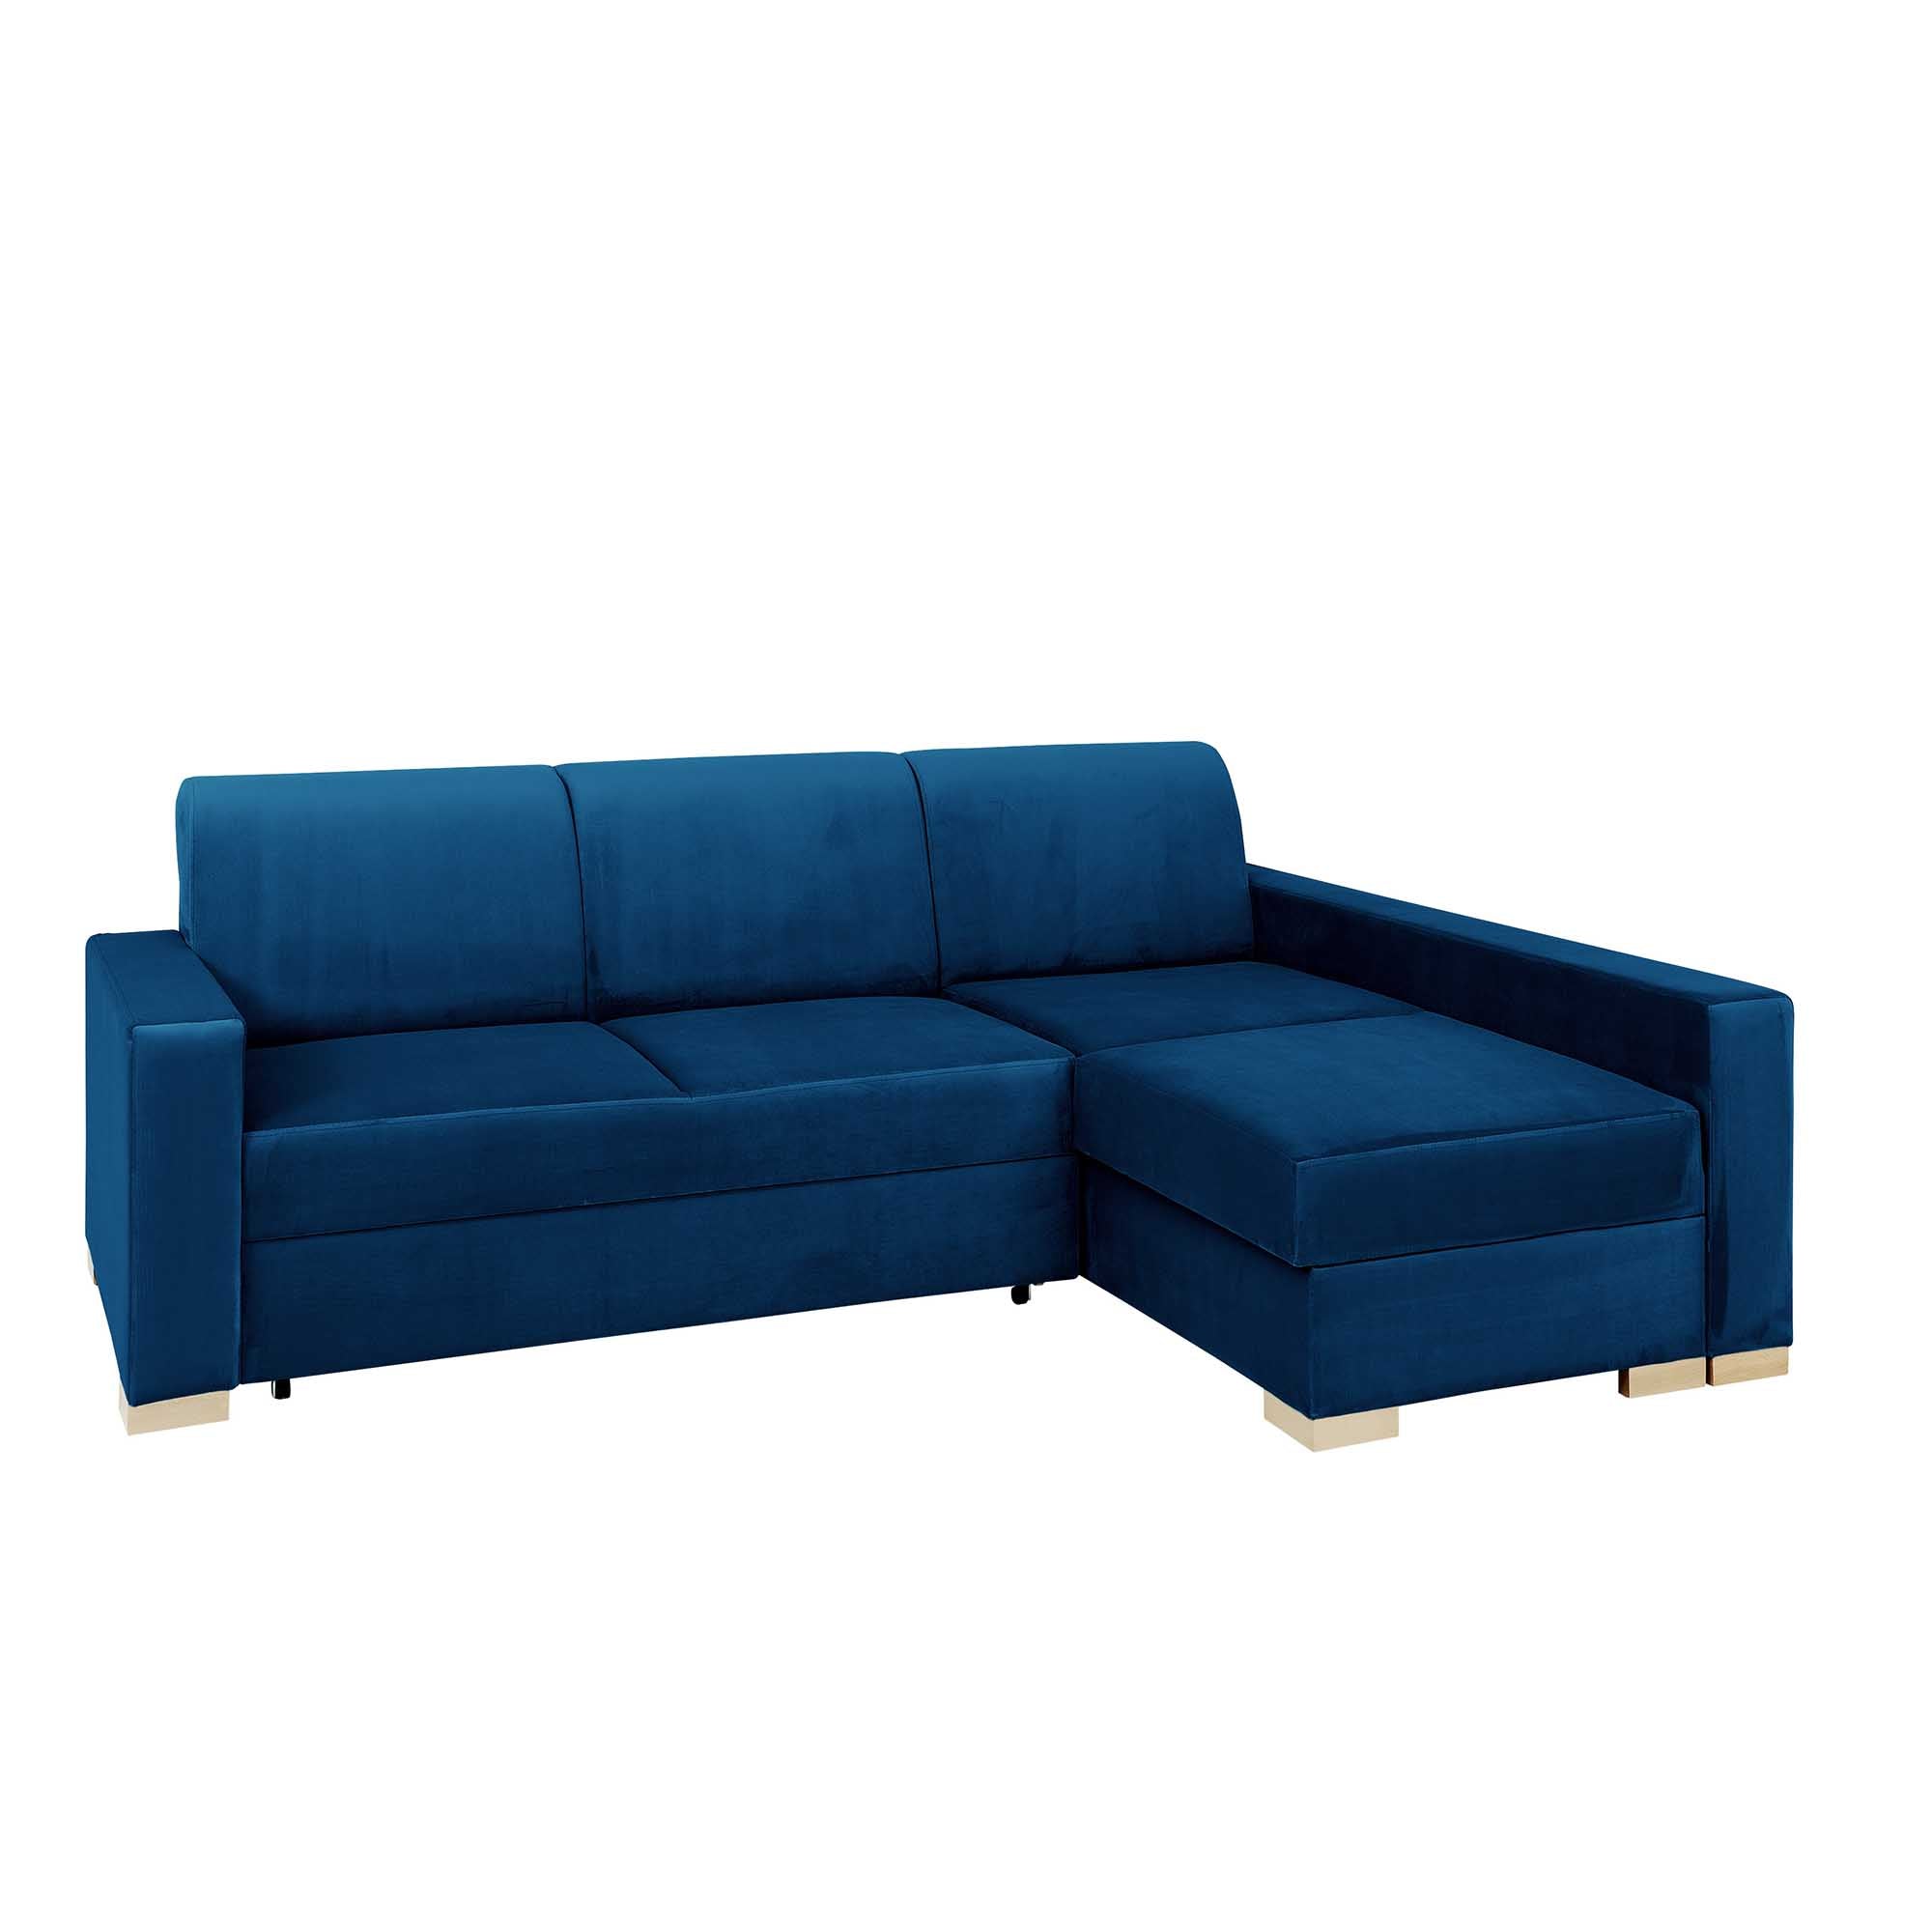 STABLE Corner Sofa Right upholstery colour blue